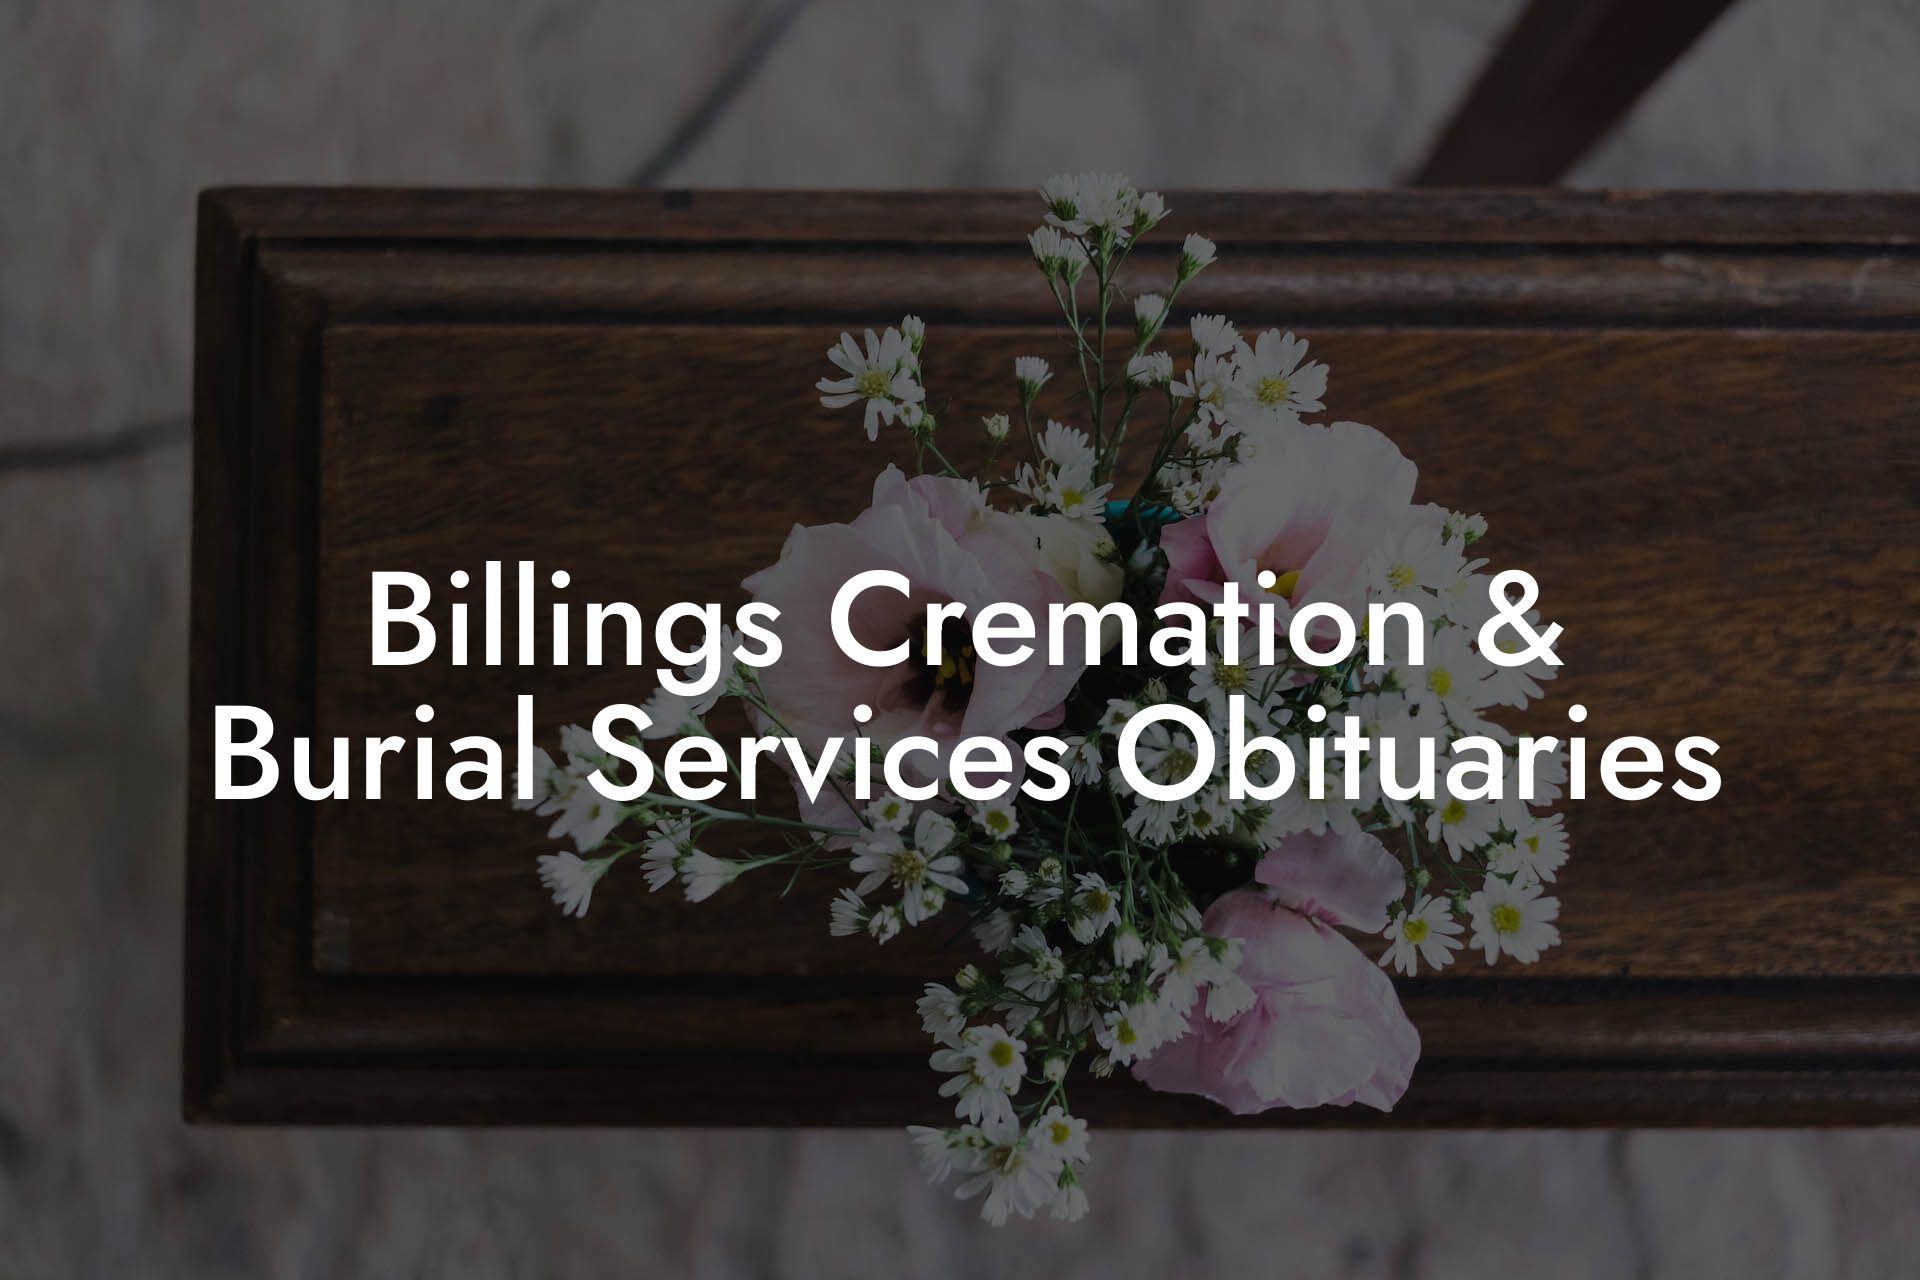 Billings Cremation & Burial Services Obituaries